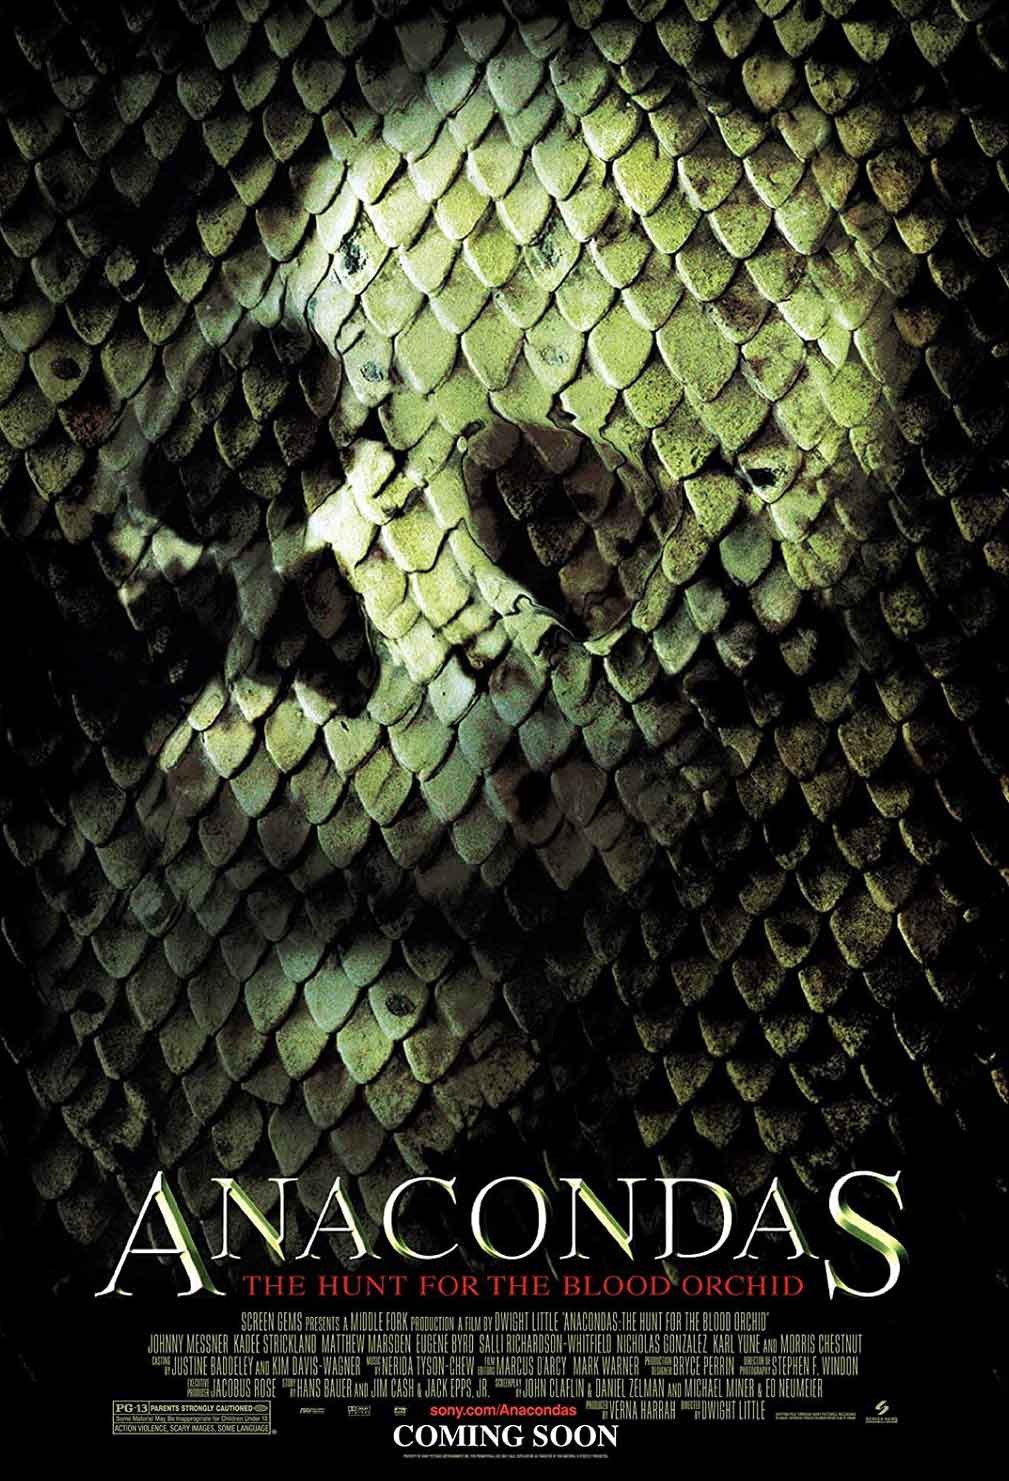 Anacondas: The Hunt for the Blood Orchid movie poster